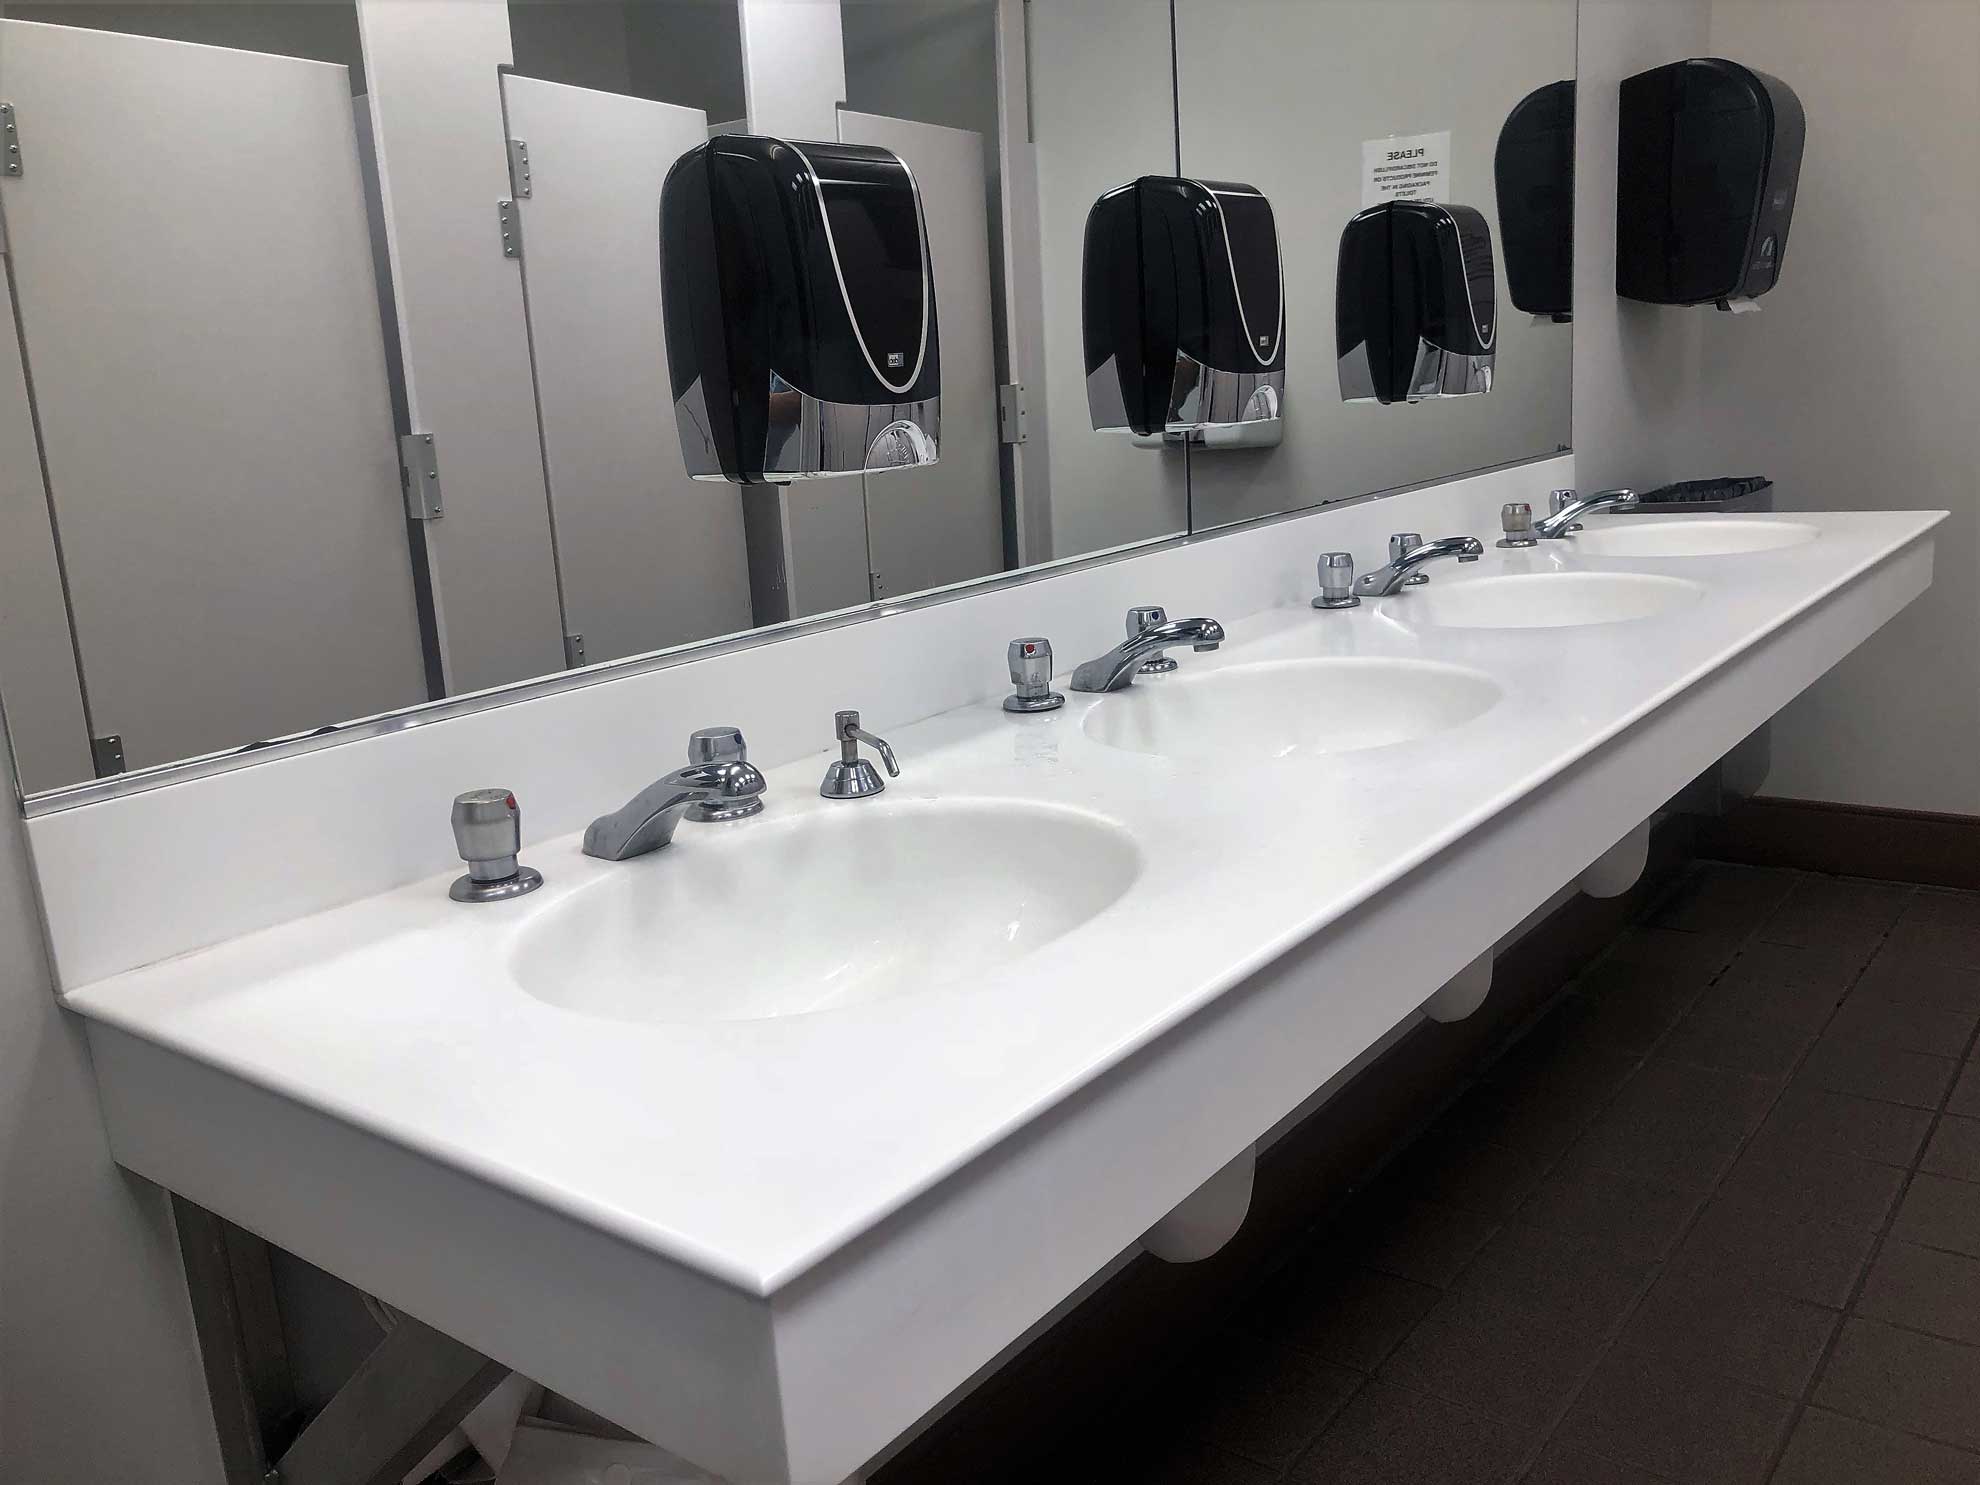 Commercial Restroom Cleaning Services Near Me in 29601